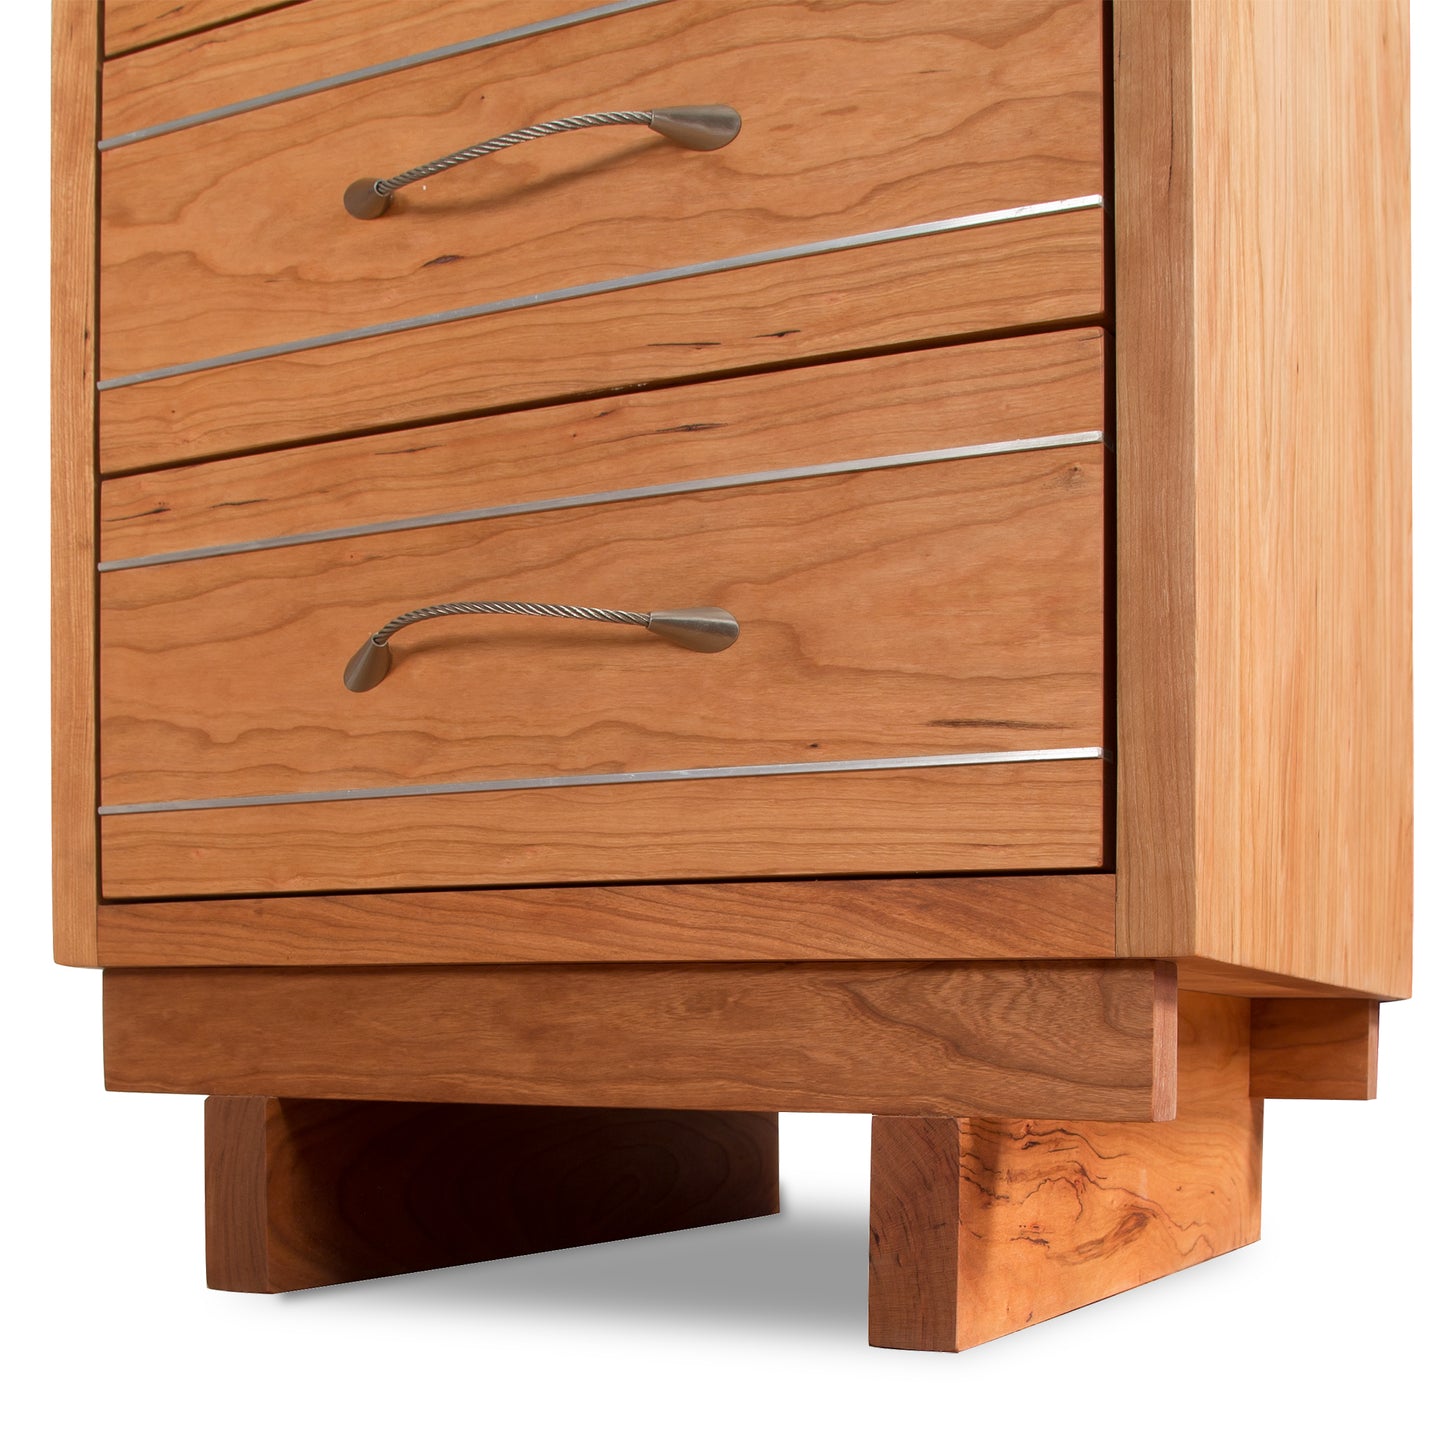 A close-up of a Vermont Furniture Designs Contemporary Cable 3-Drawer Nightstand featuring dovetail drawers, metal handles, and a solid base.